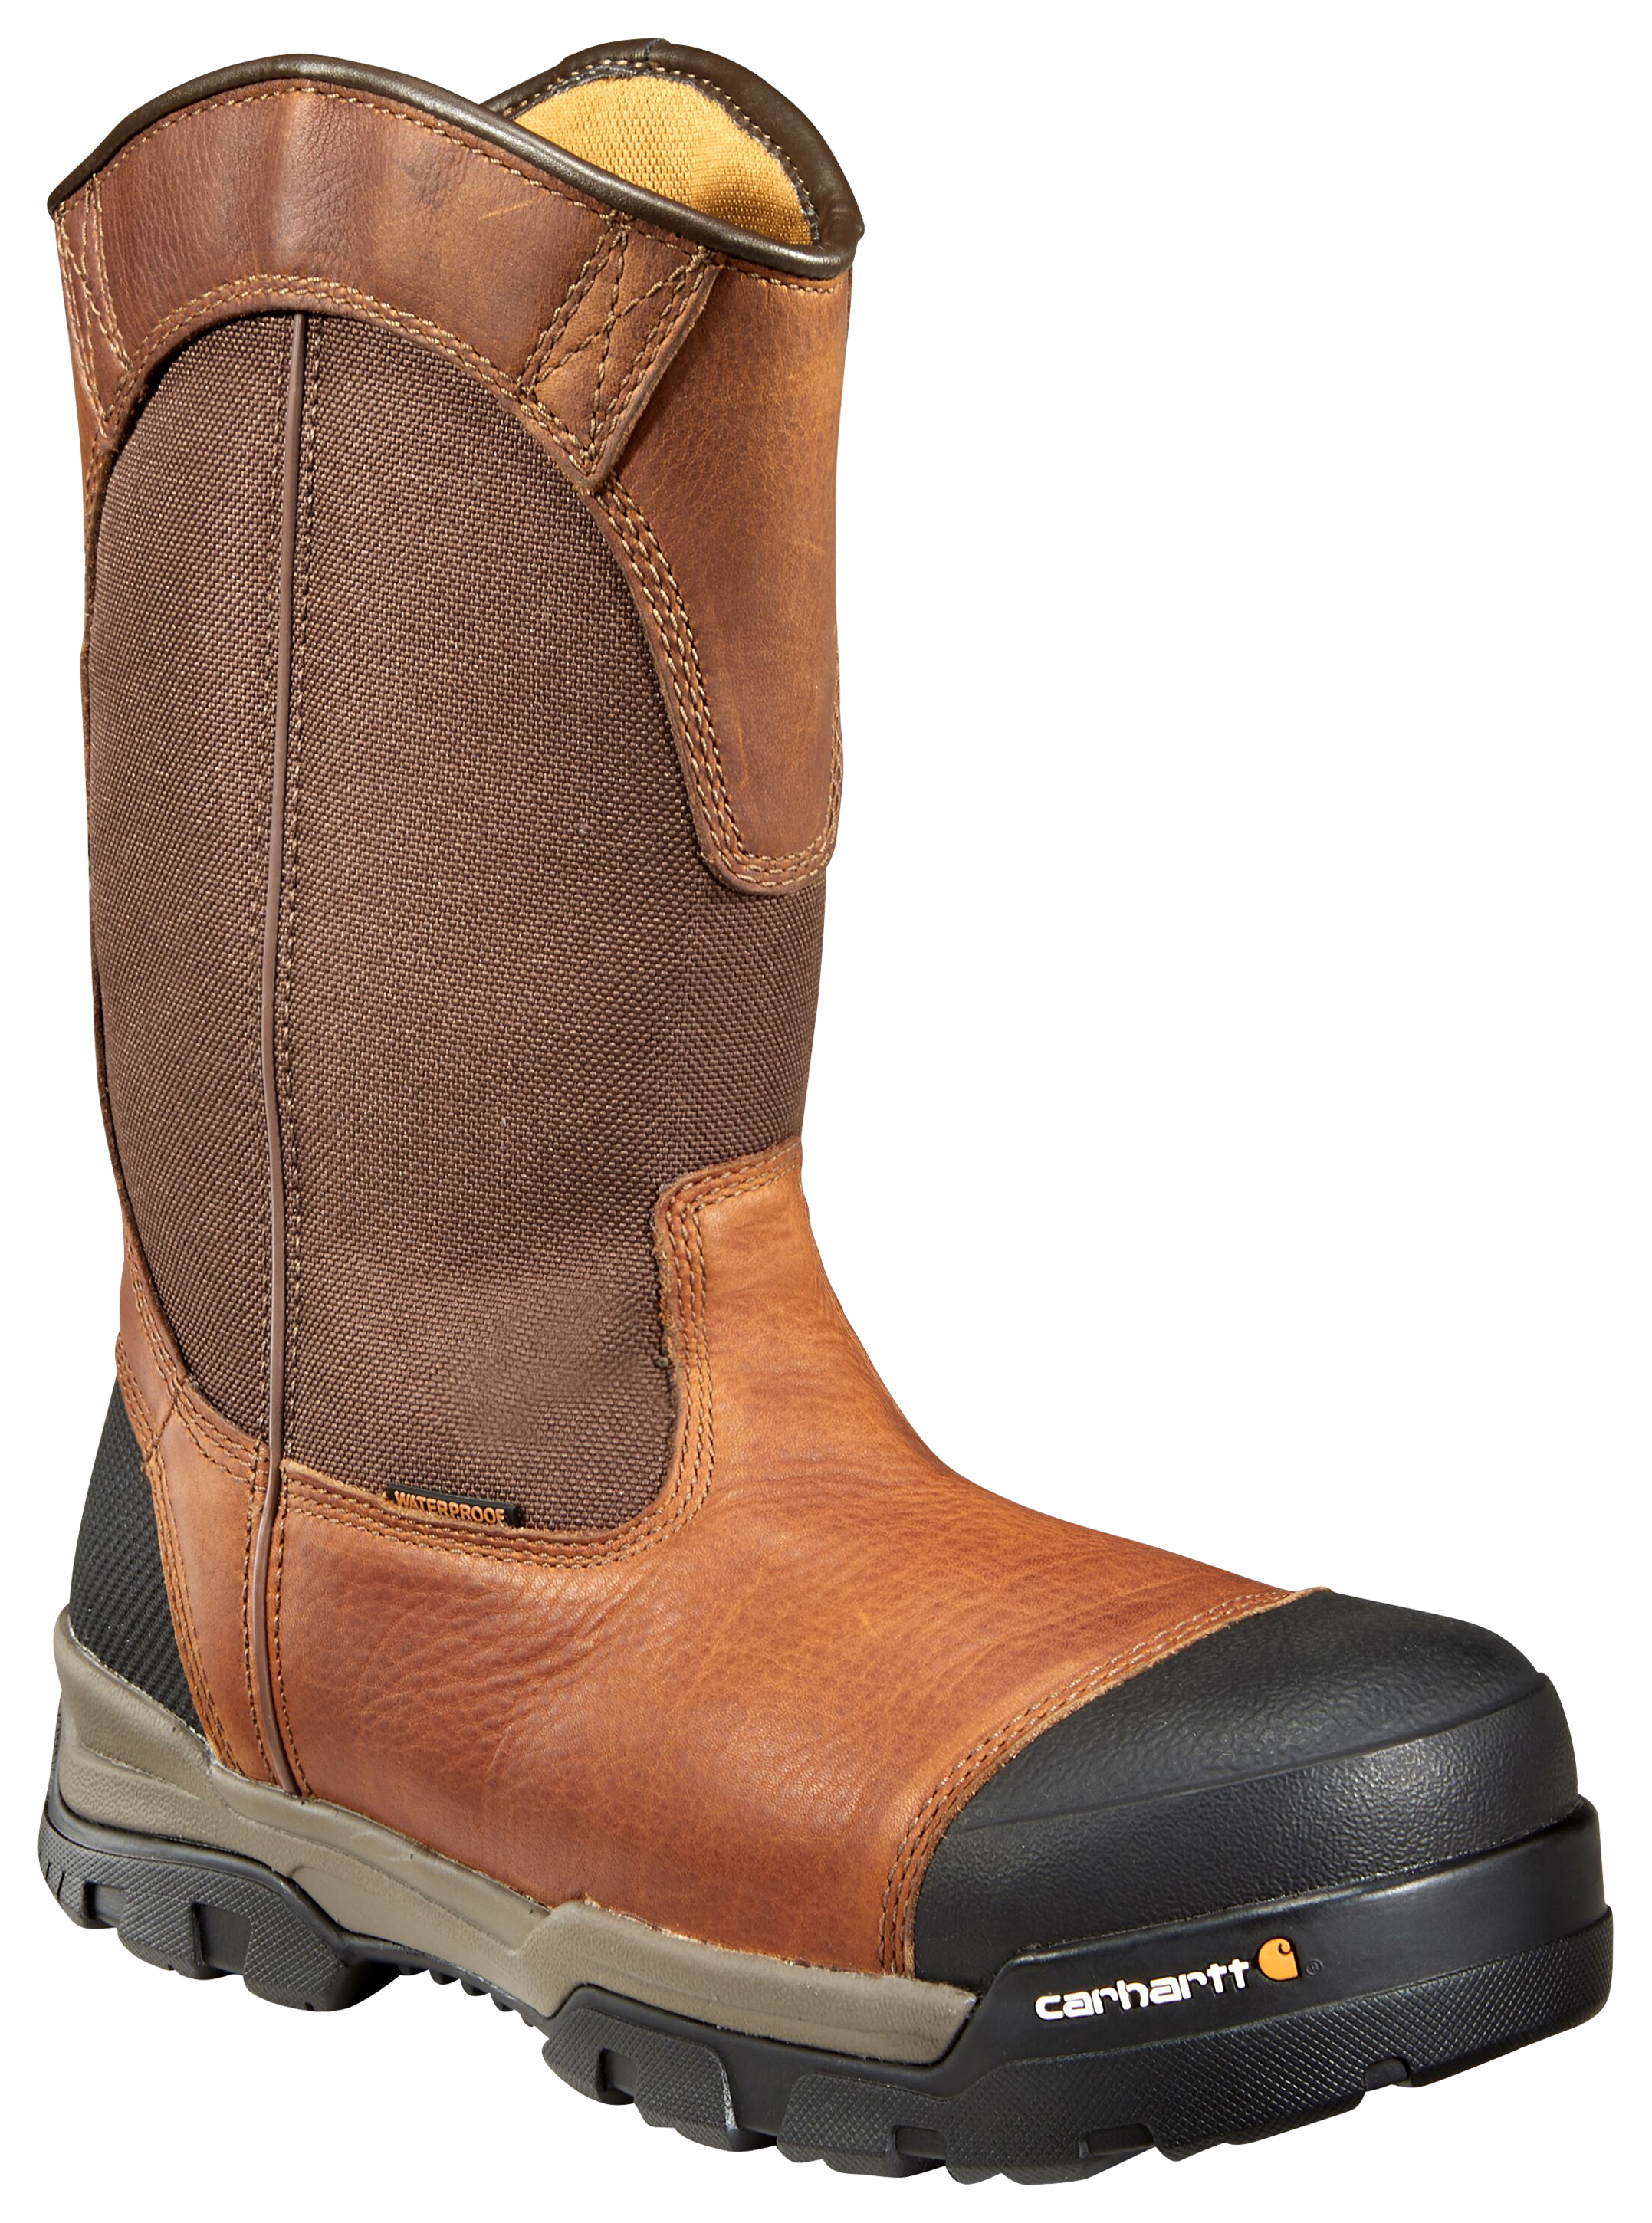 Carhartt Ground Force Waterproof Composite Toe Pull-On Work Boots for Men